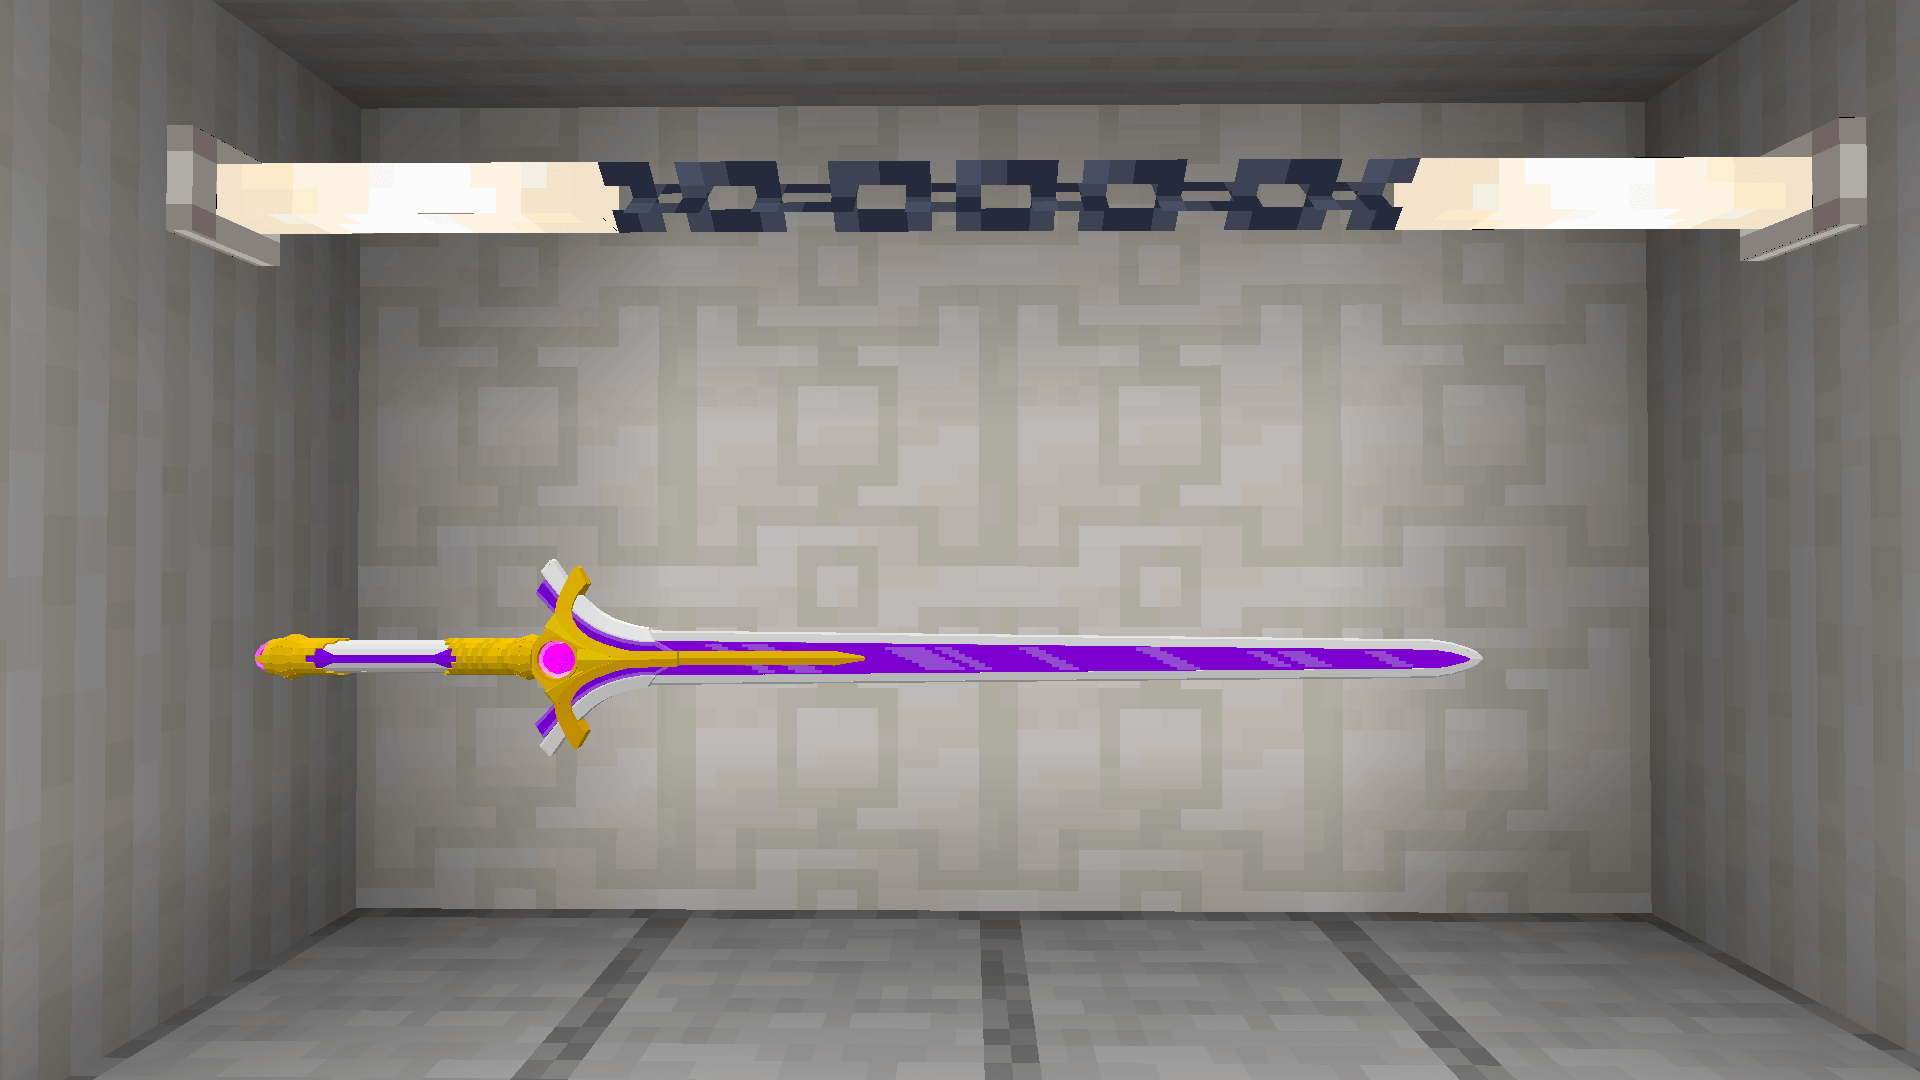 Swords Mod for Minecraft PE 3.0 Free Download